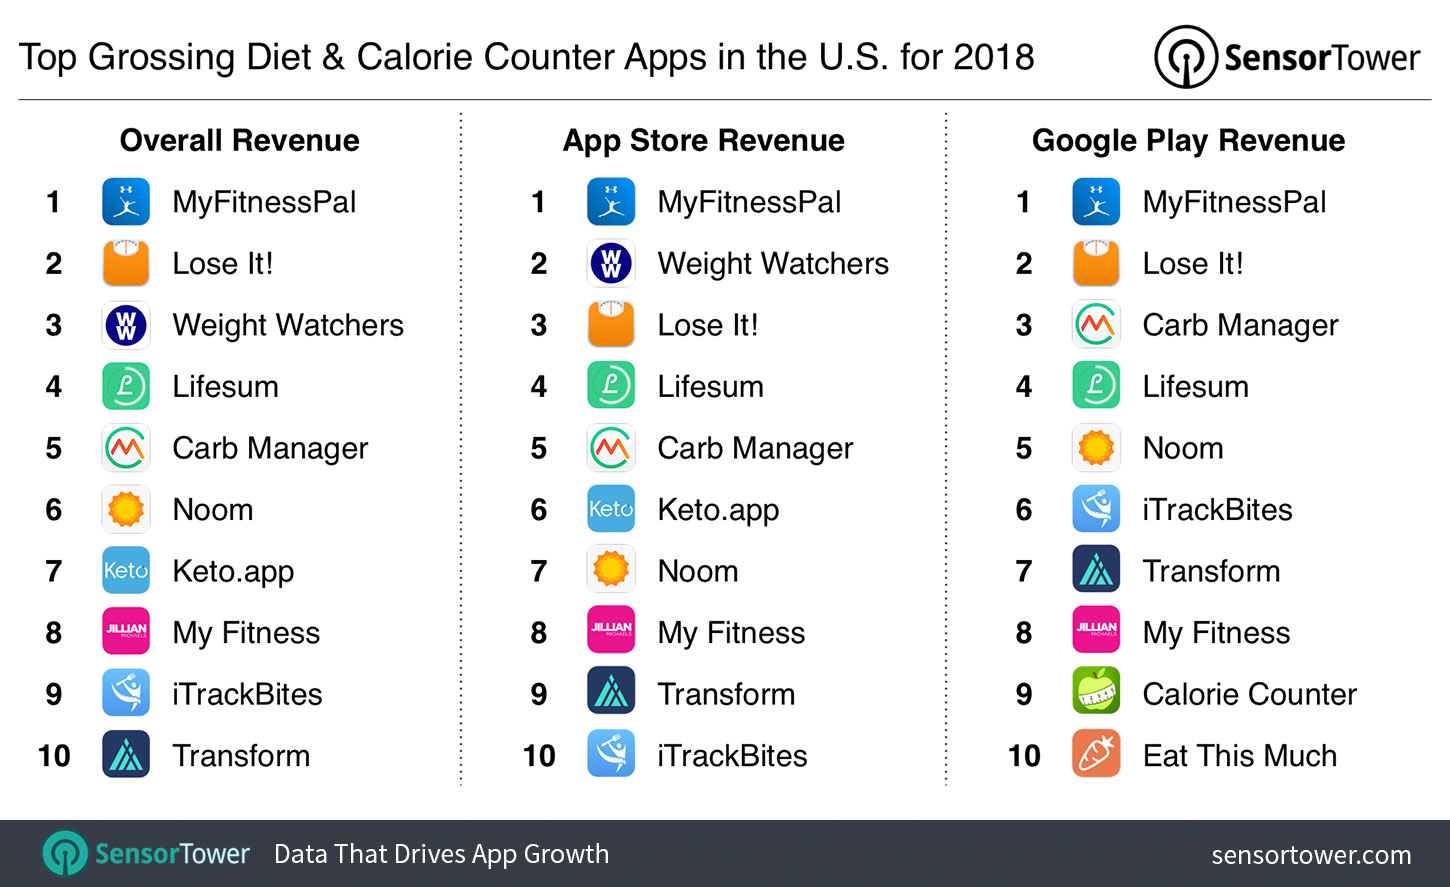 Top Grossing Diet and Calorie Counter Apps in the U.S. for 2018